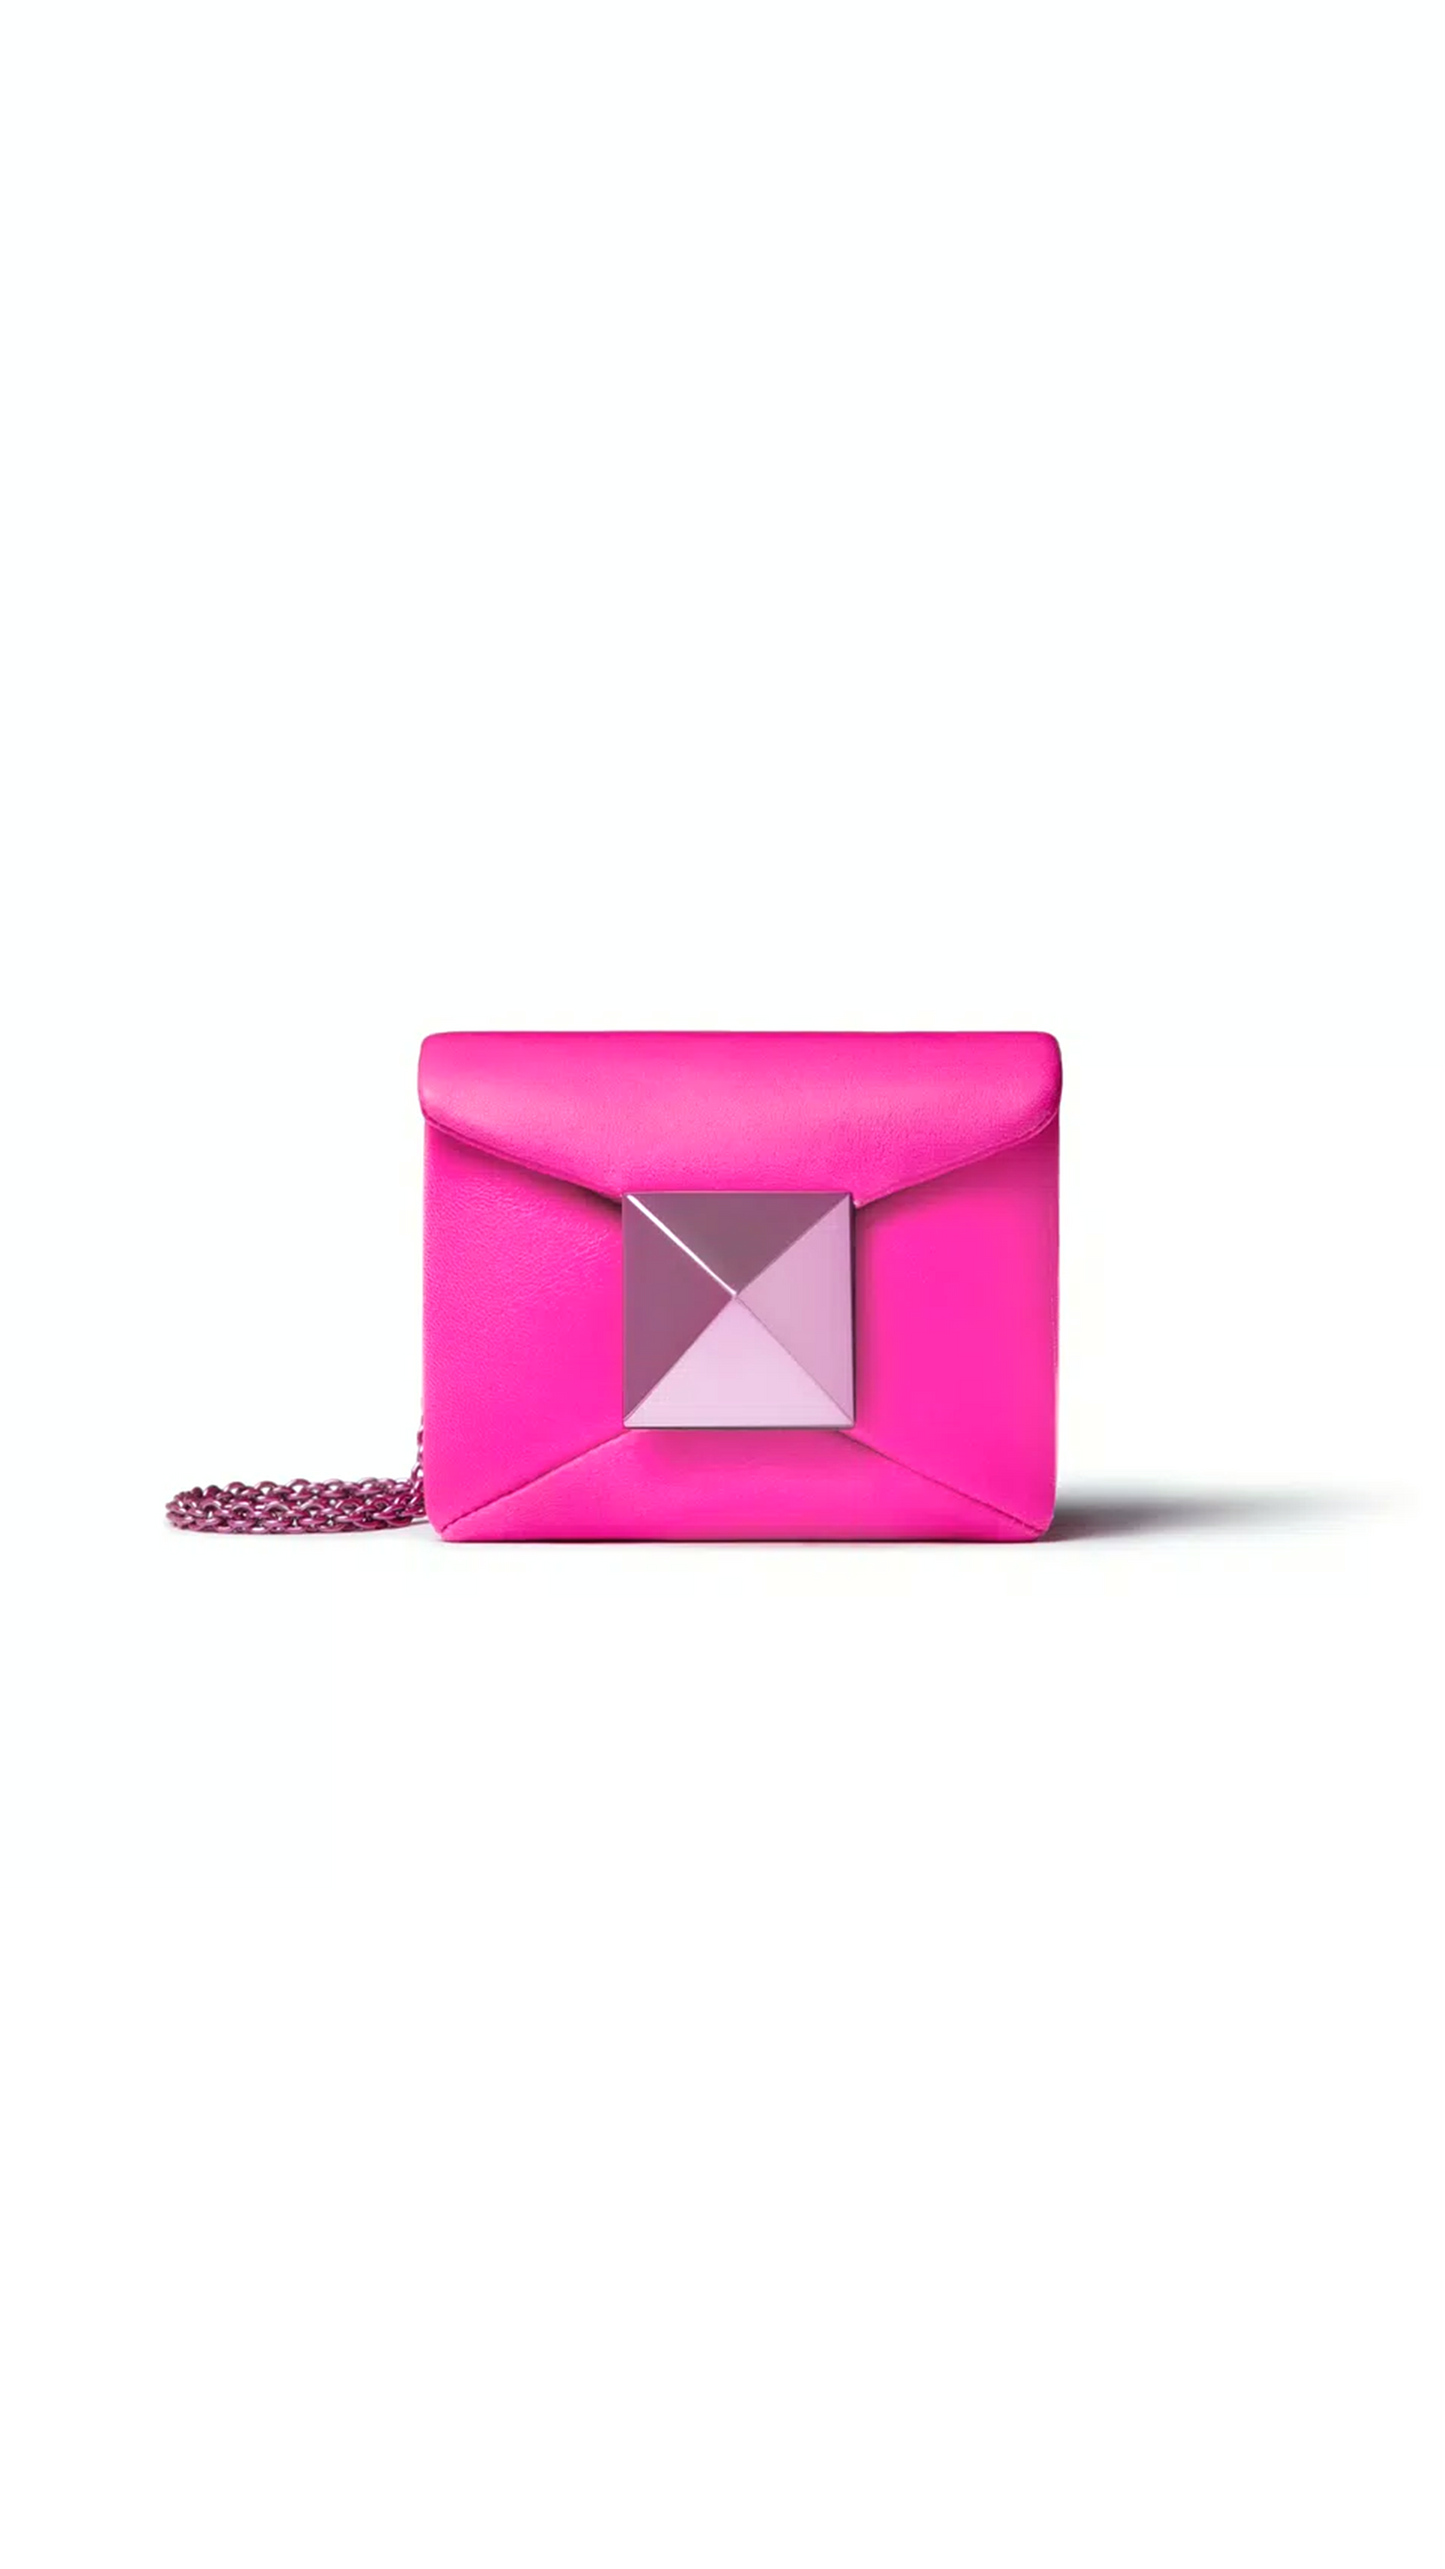 One Stud Nappa Micro Bag with Chain - Pink PP